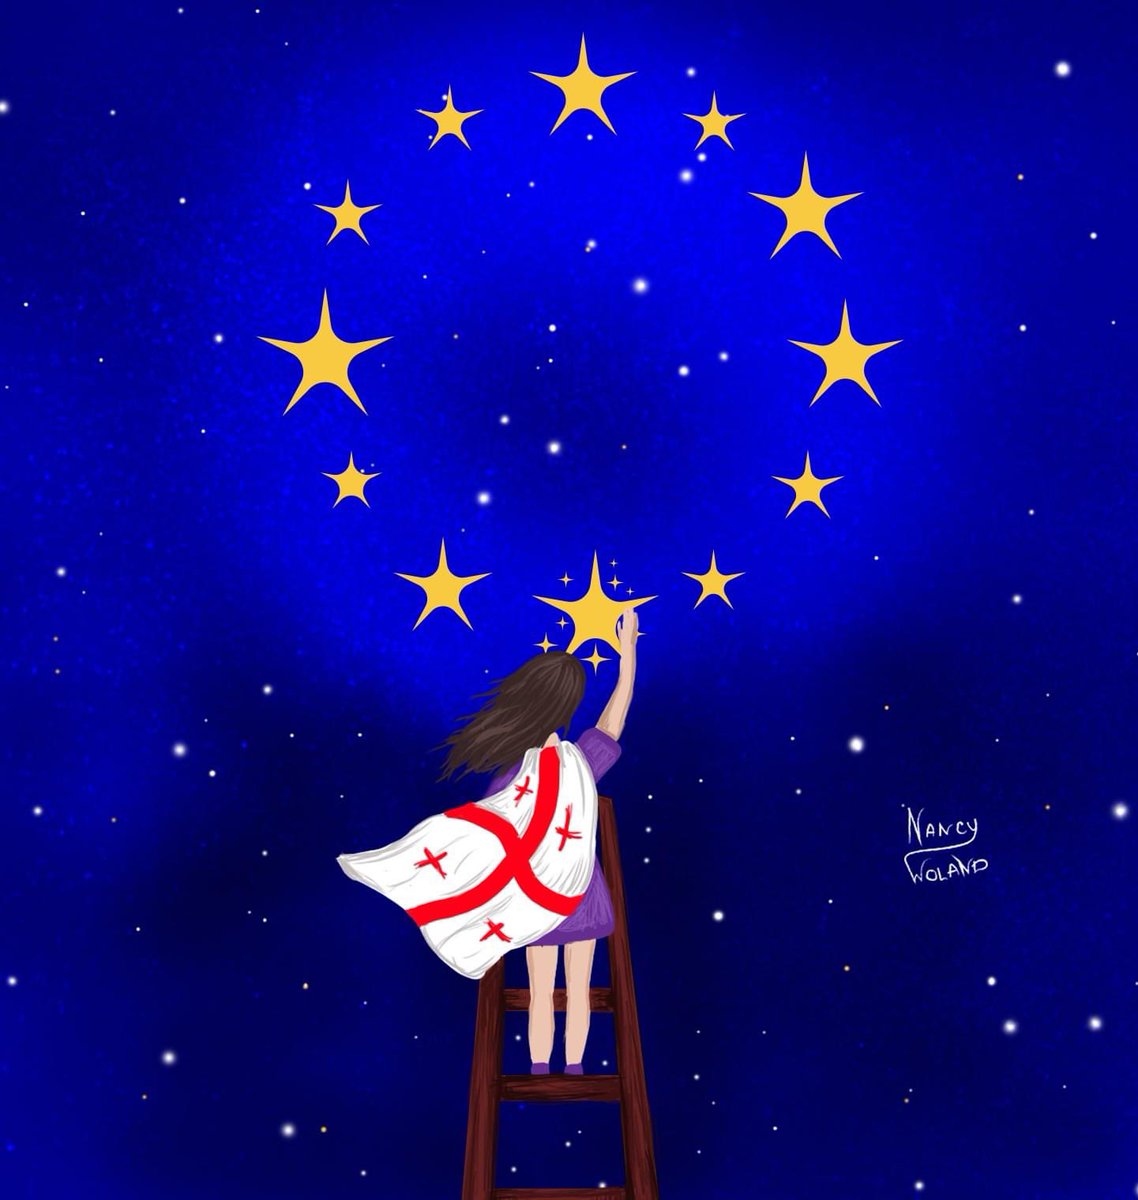 Happy Independence day #Georgia! 🇬🇪❤️ The only way forward is Europe 🇪🇺 #EU 
image by #NancyWoland